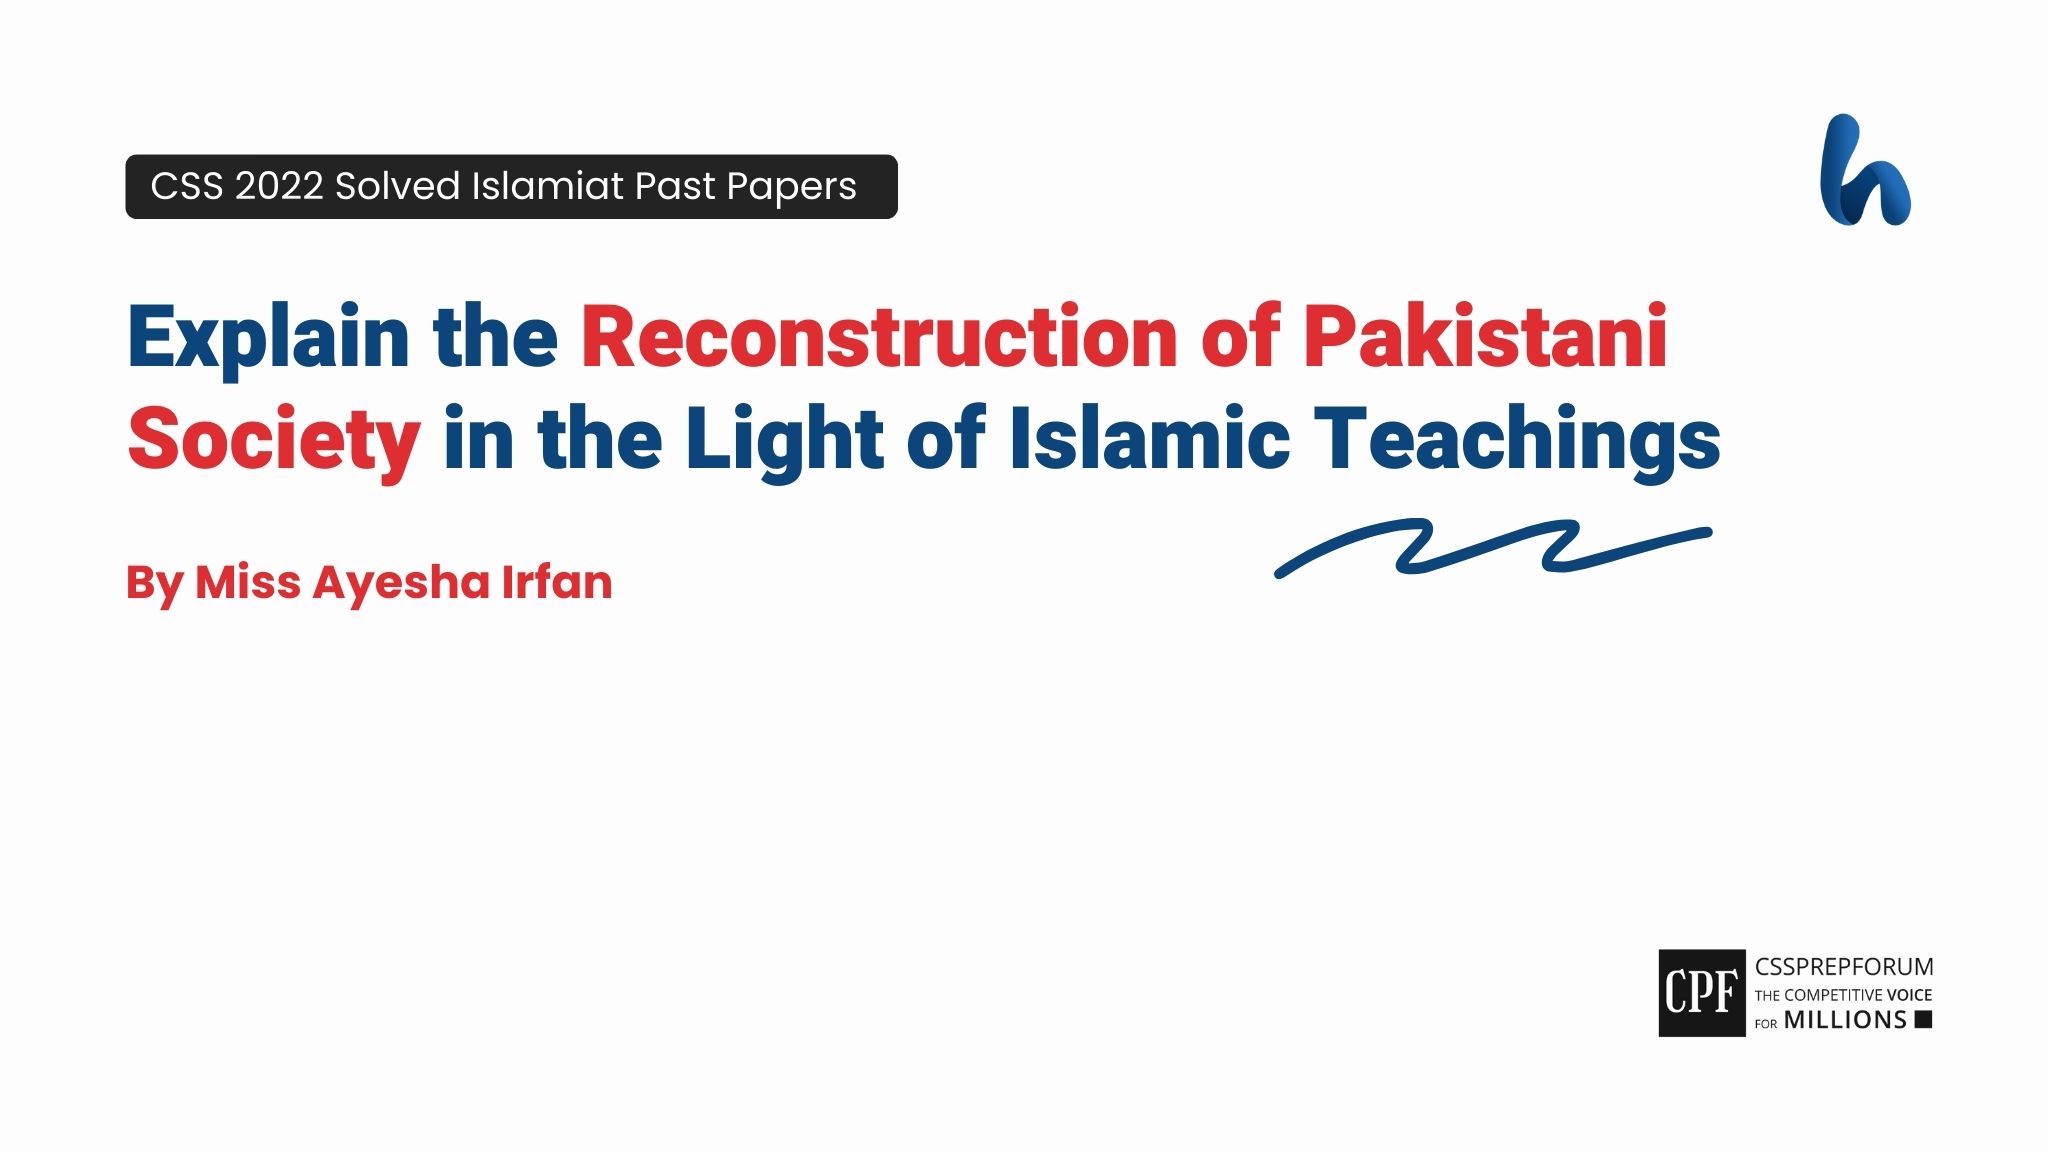 Explain the Reconstruction of Pakistani Society in the Light of Islamic Teachings. (1)